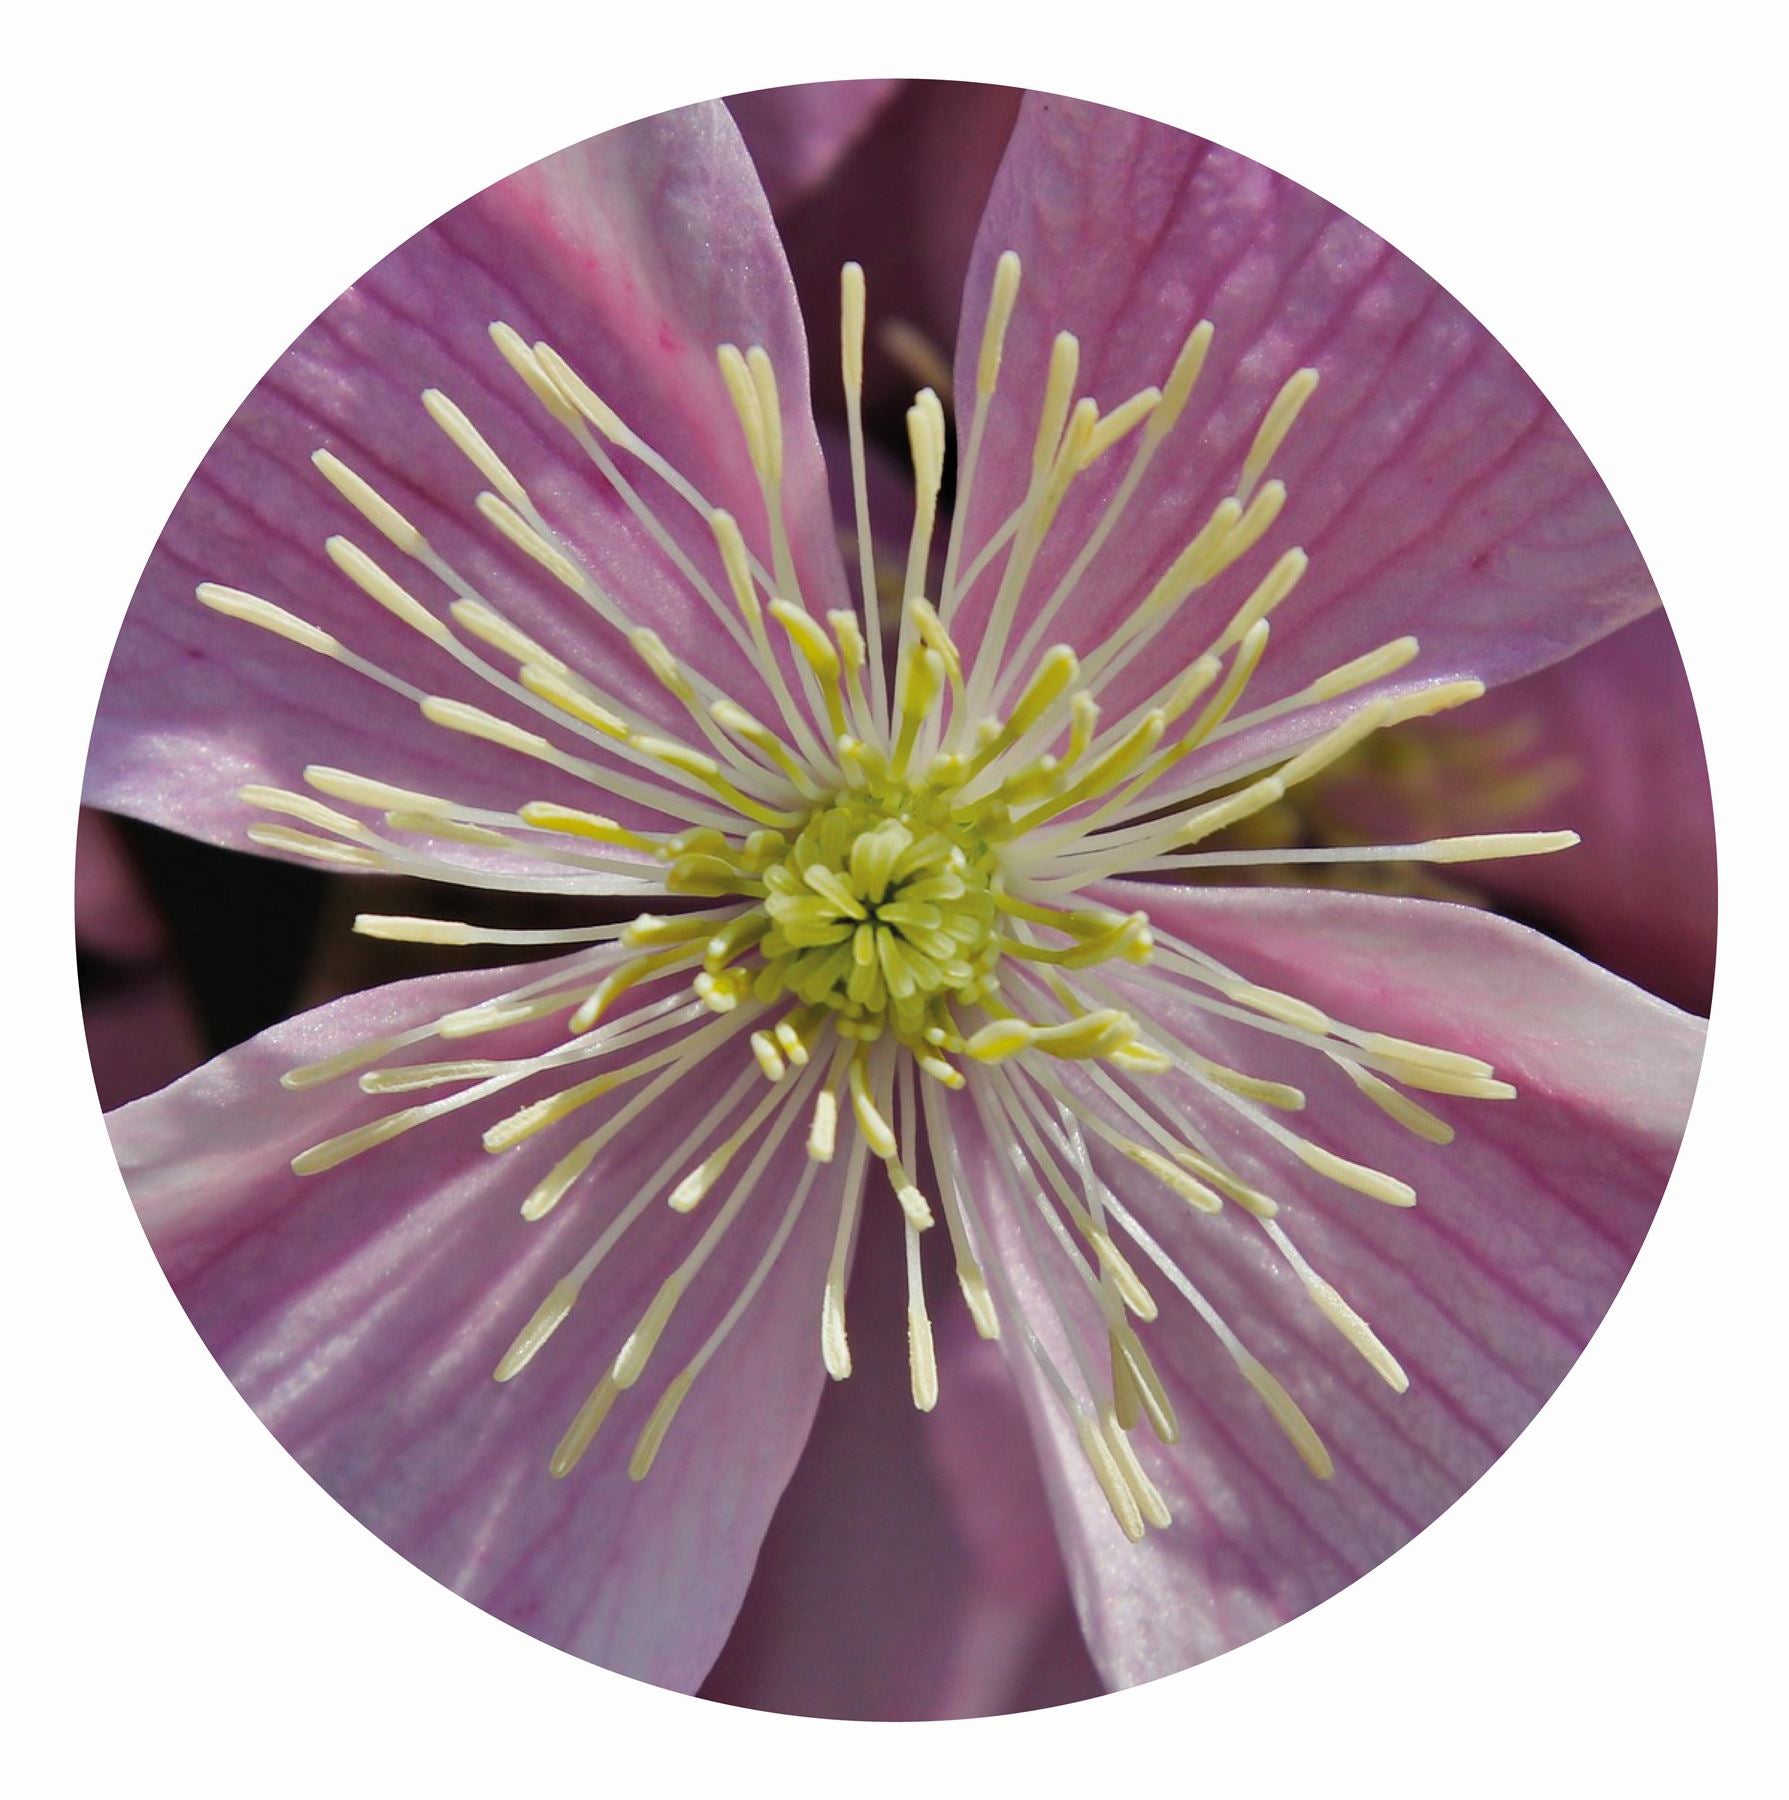 Clematis Circular Impuzzible 400 Piece Jigsaw Puzzle